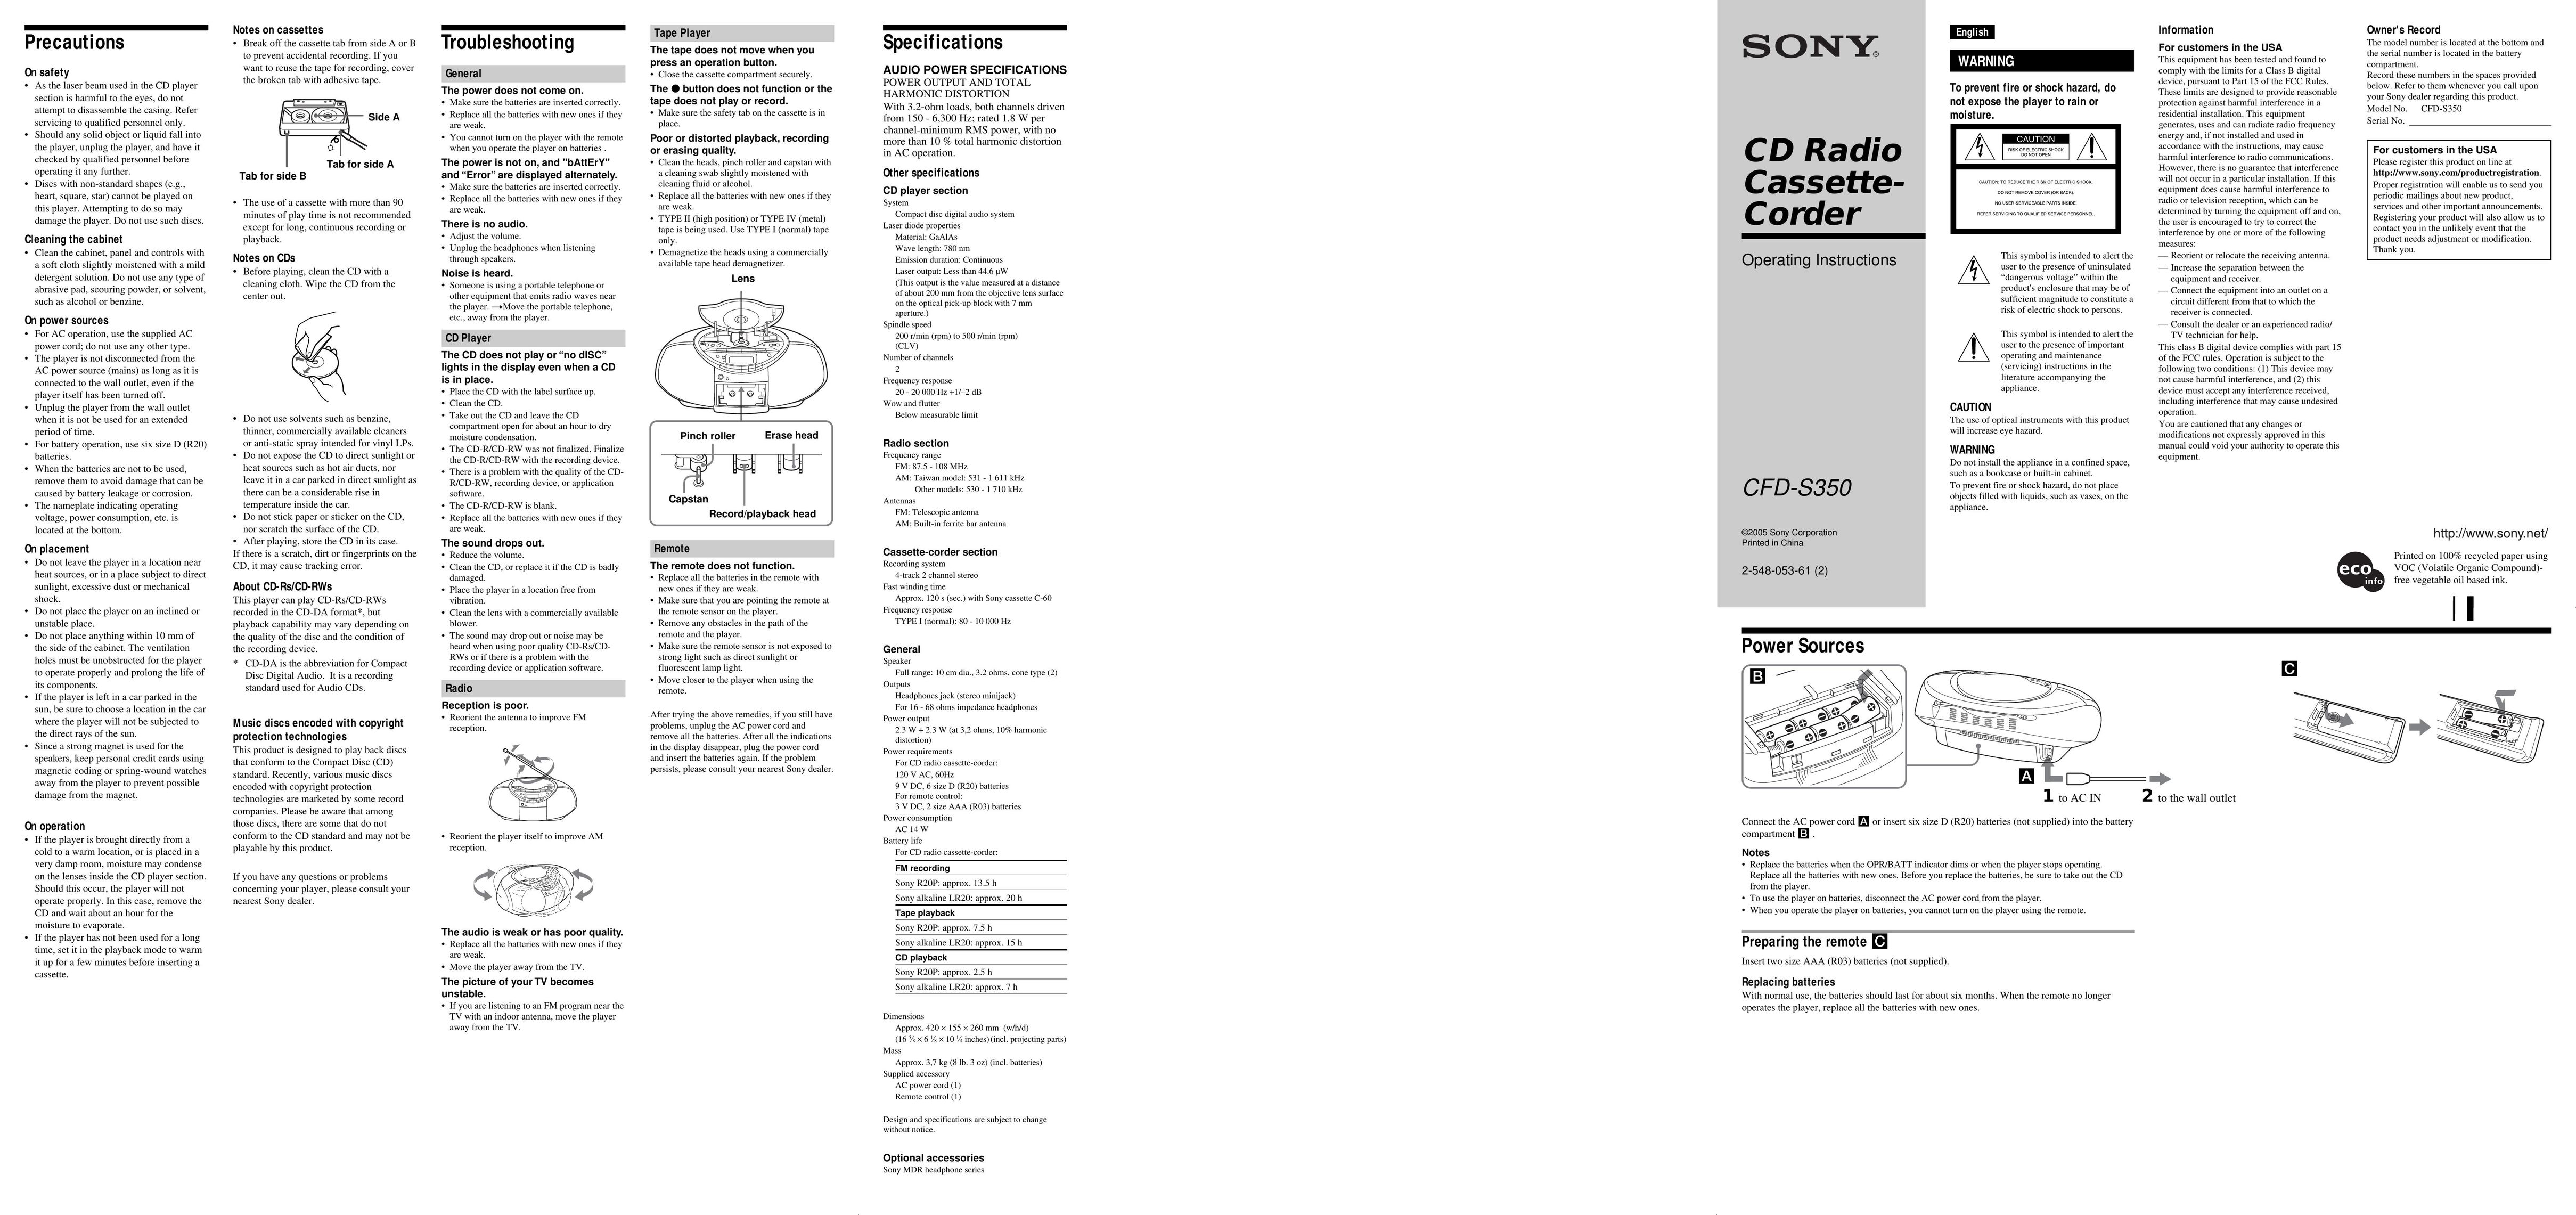 Sony CFD-S350 Cassette Player User Manual